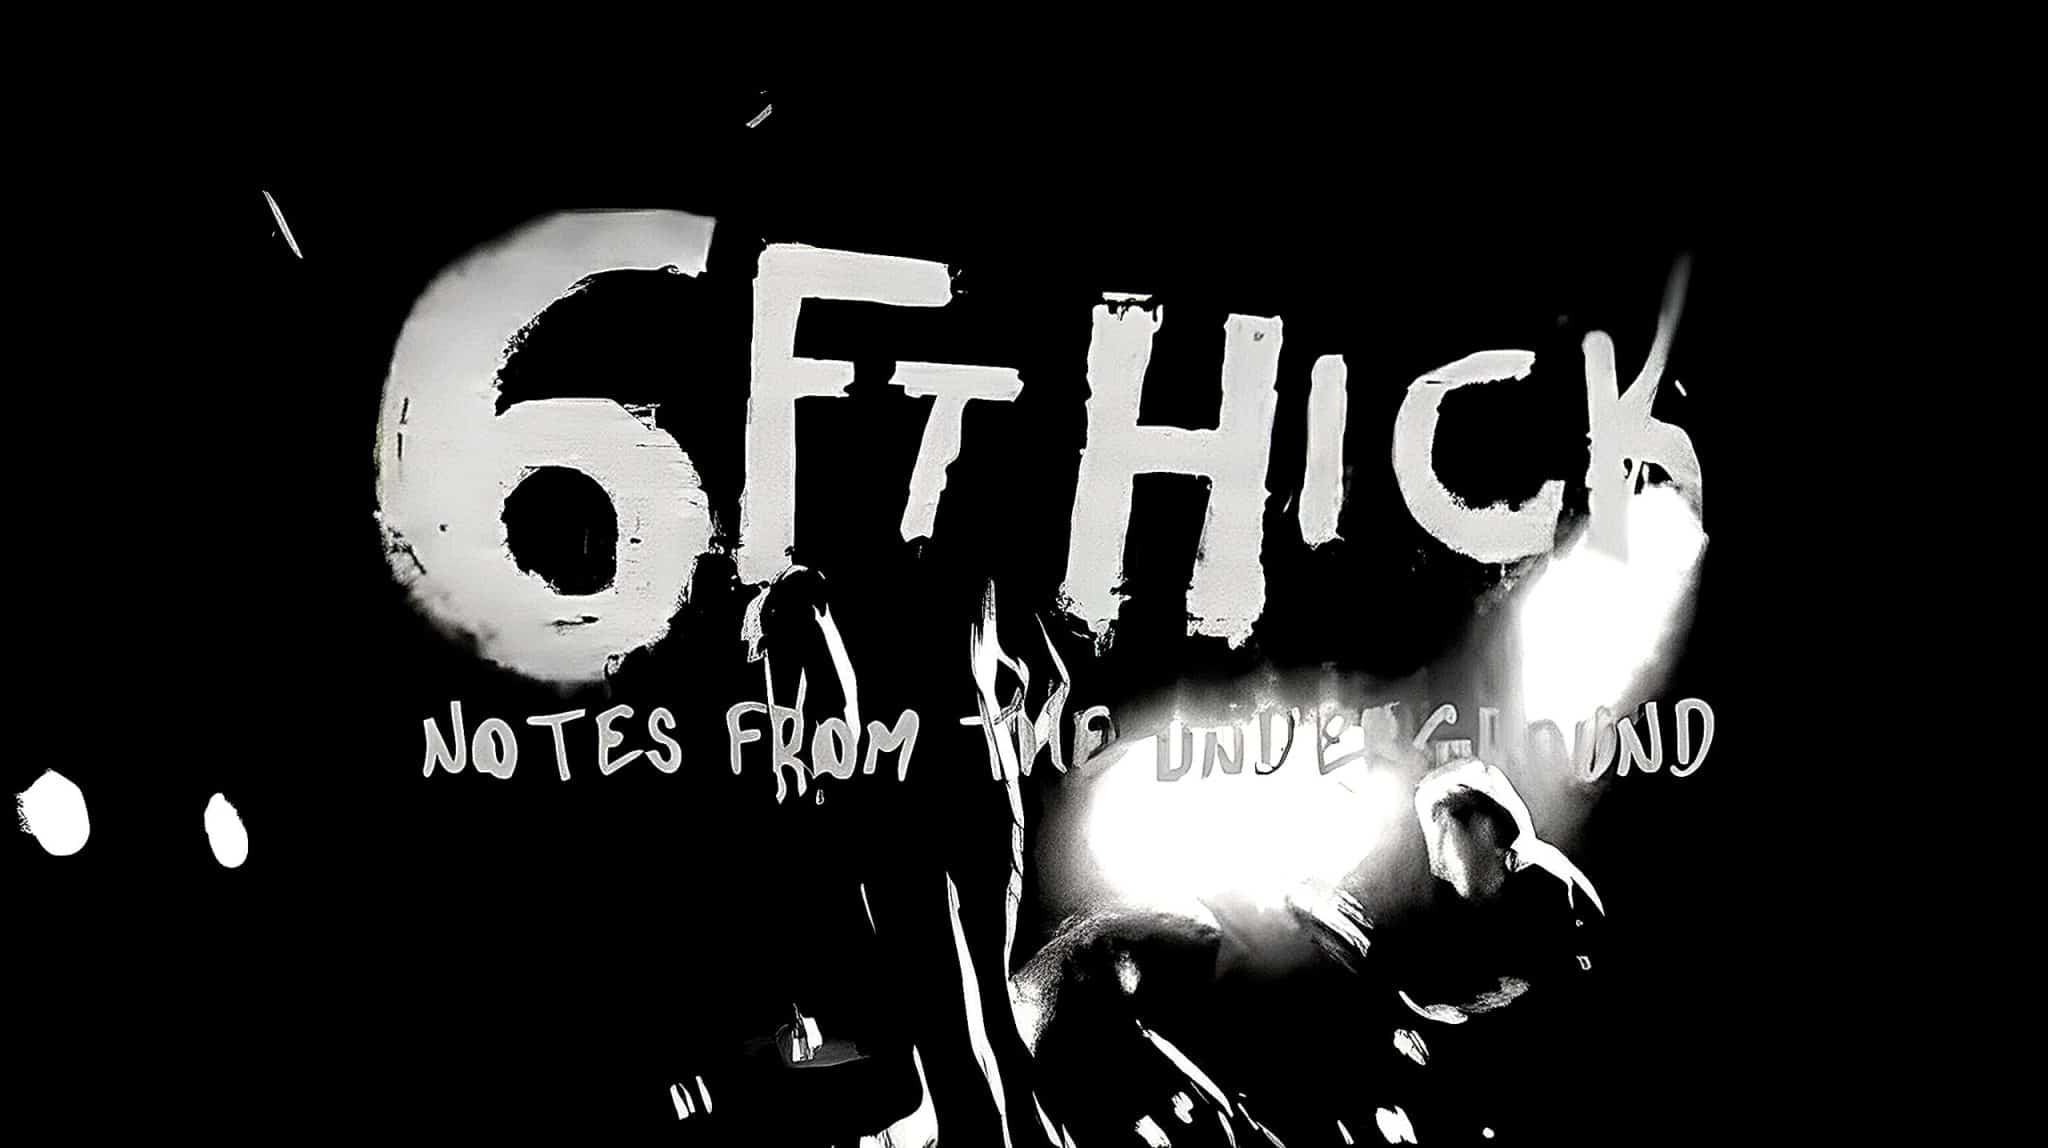 6Ft Hick: Notes from the Underground